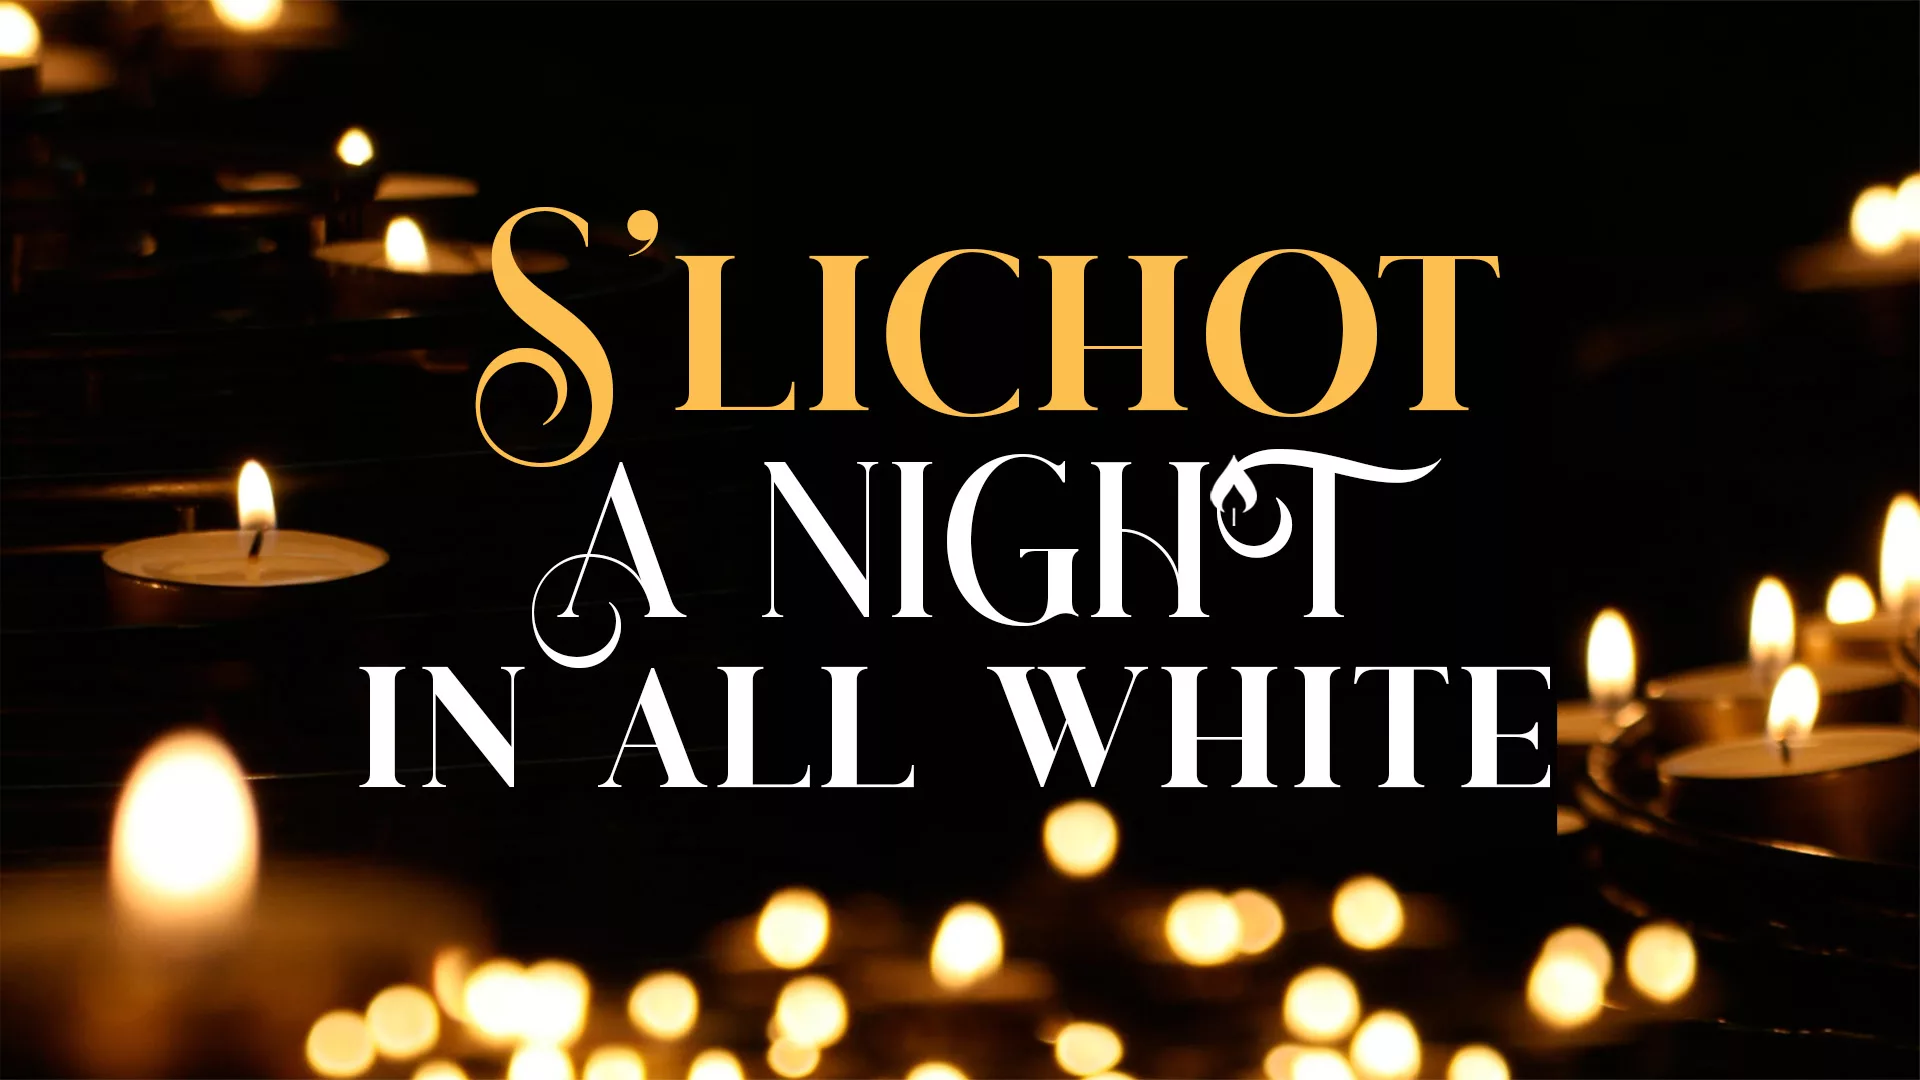 S'lichot A night in all white banner